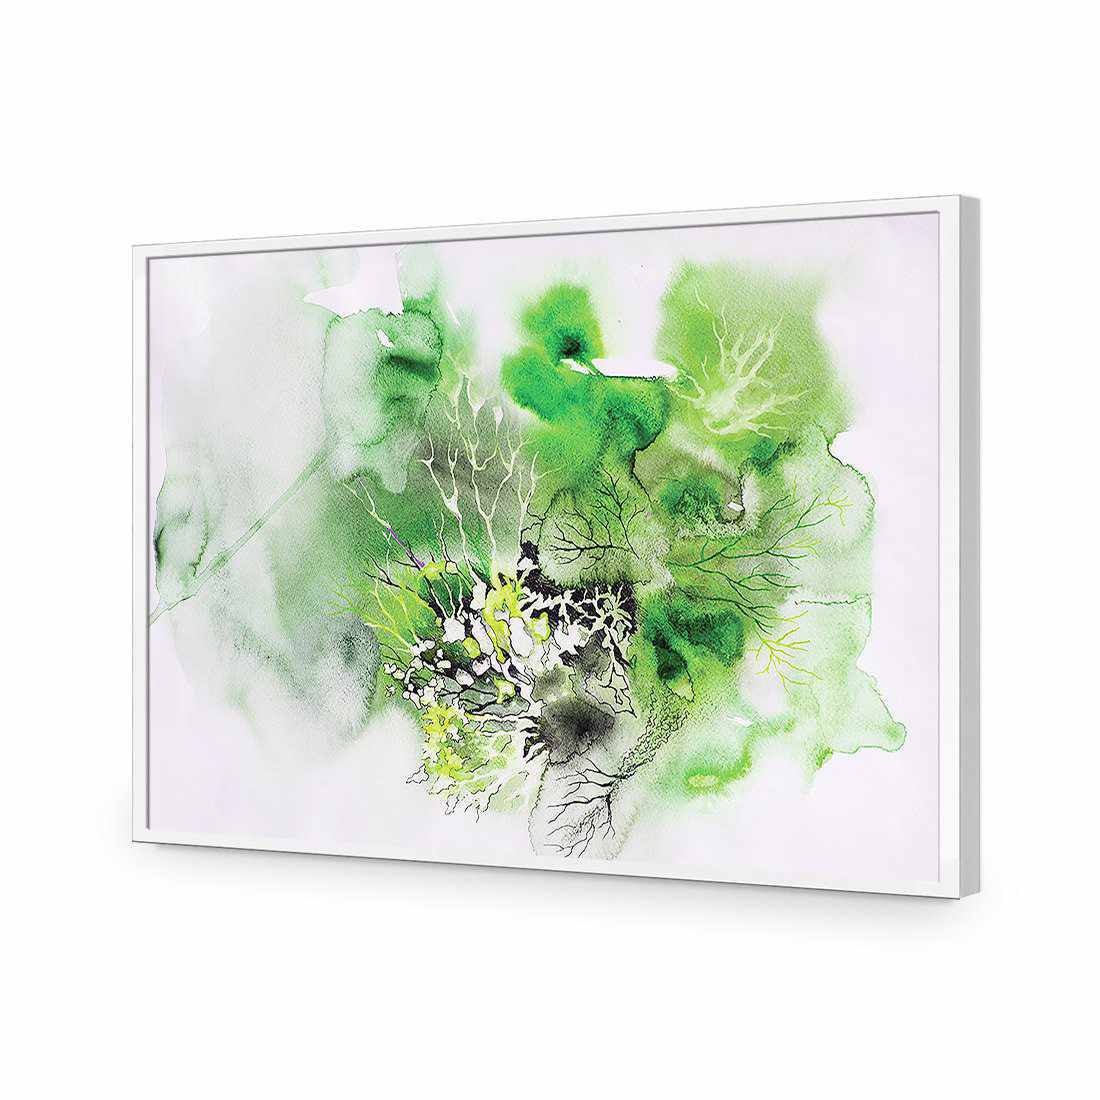 Veins Of Life, Green-Acrylic-Wall Art Design-Without Border-Acrylic - White Frame-45x30cm-Wall Art Designs